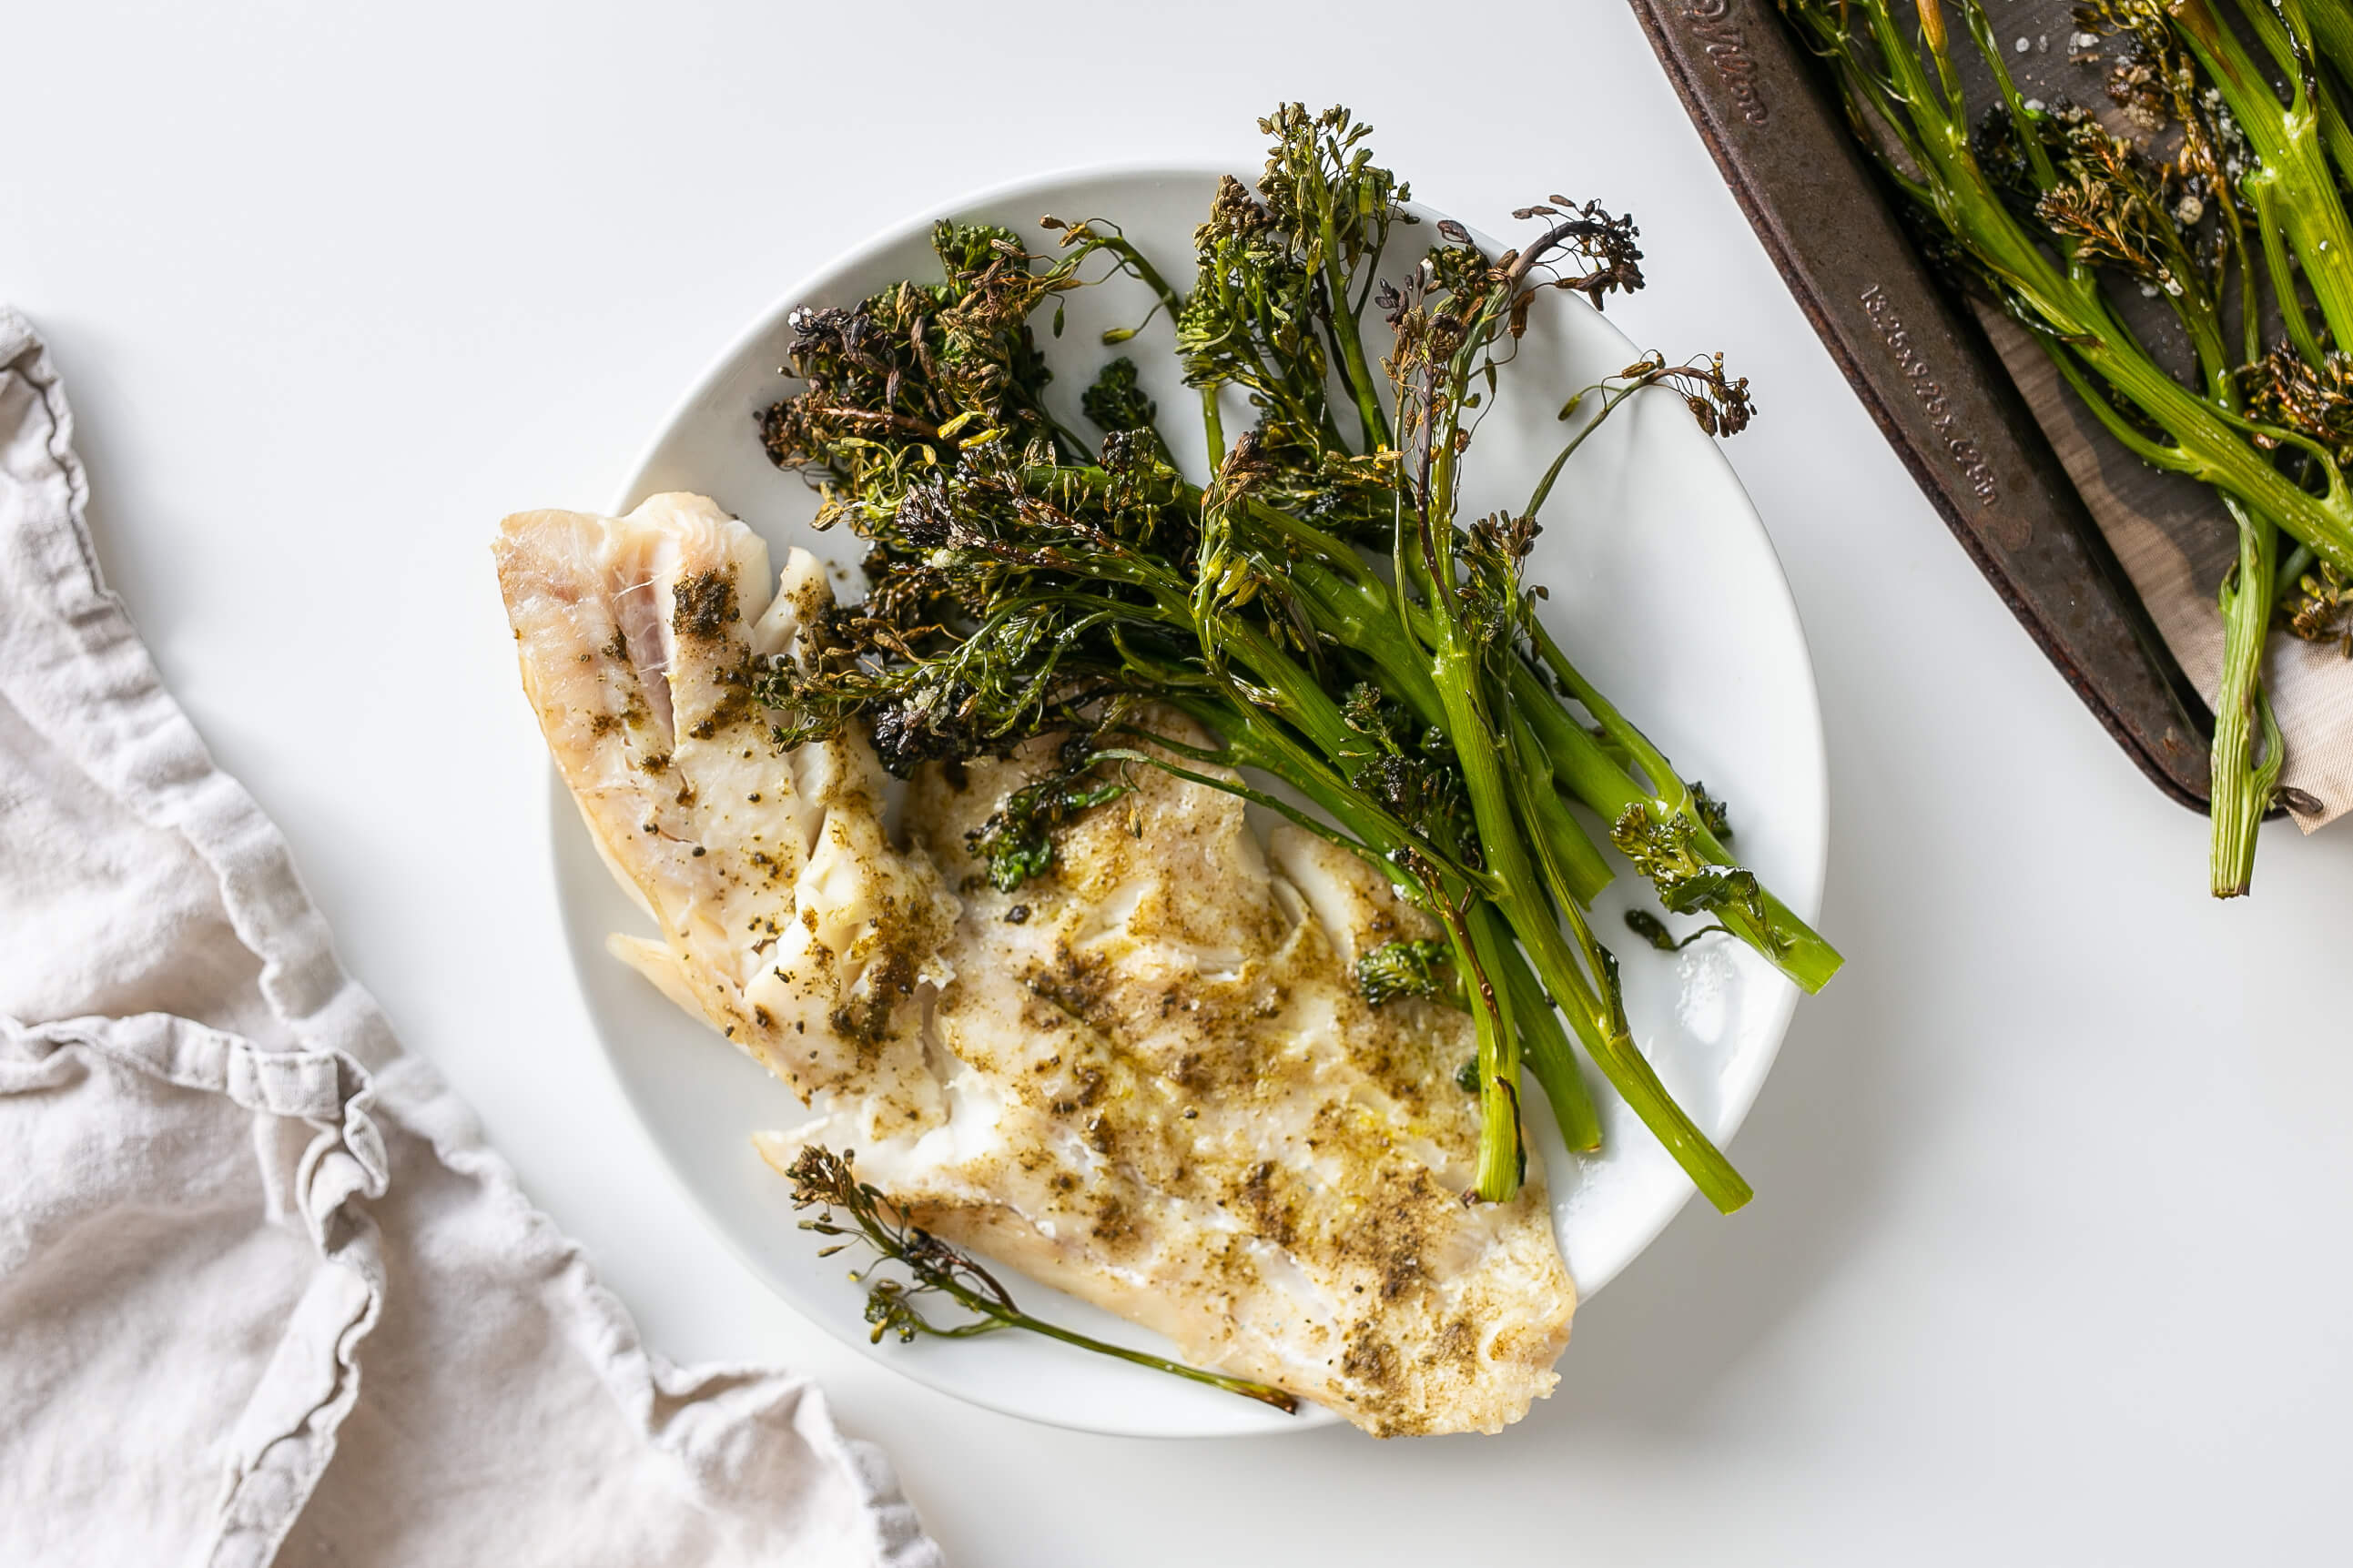 5 Ingredient Meal Ideas Your Clients Will Love: Crispy Broiled Haddock & Broccolini